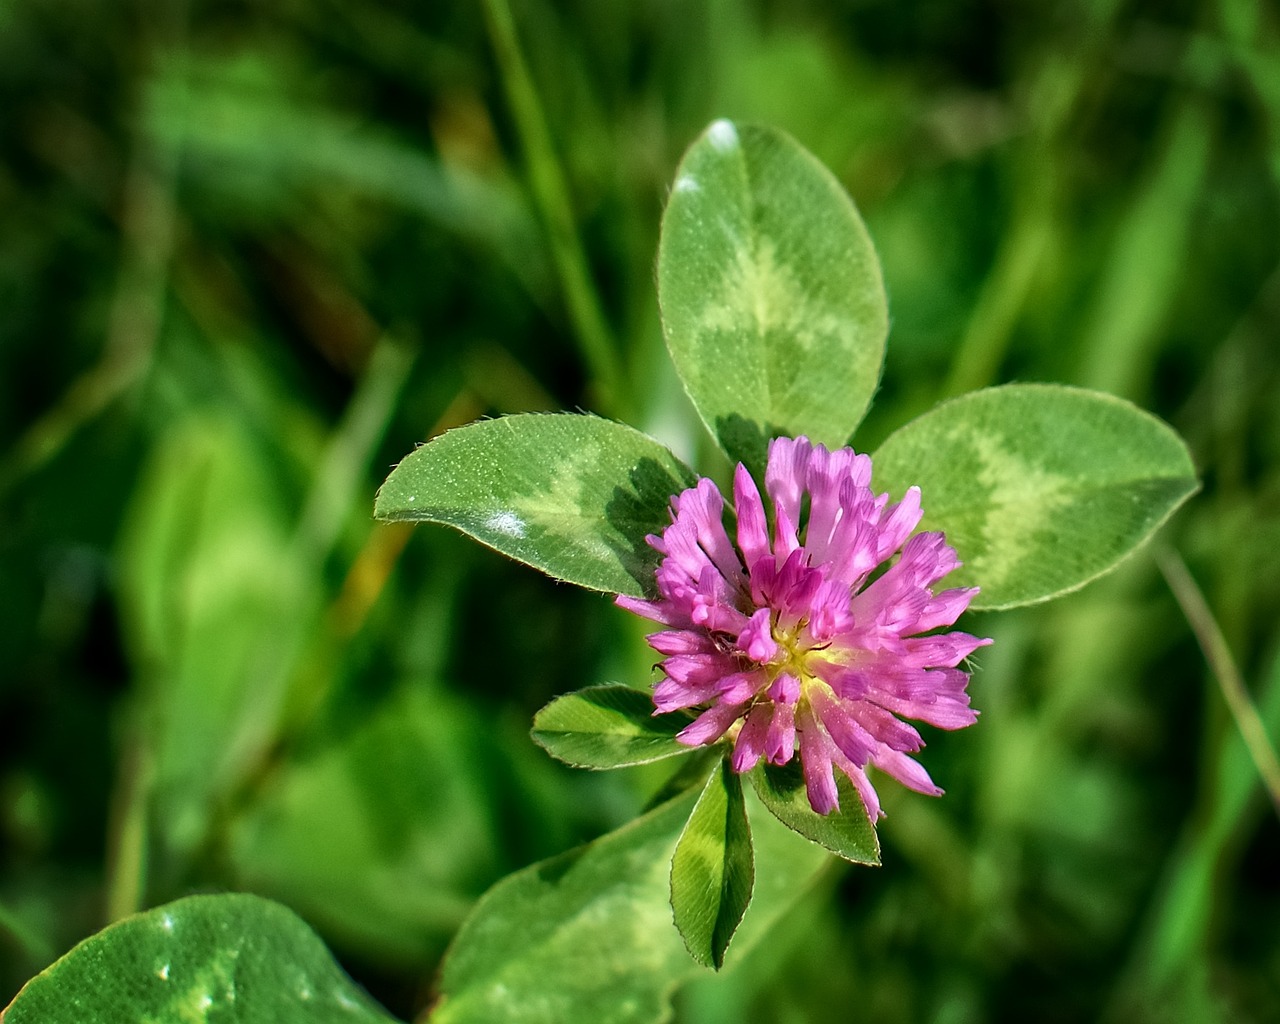 a pink flower sitting on top of a lush green field, a macro photograph, clover, wild foliage, celtic vegetation, 5 5 mm photo